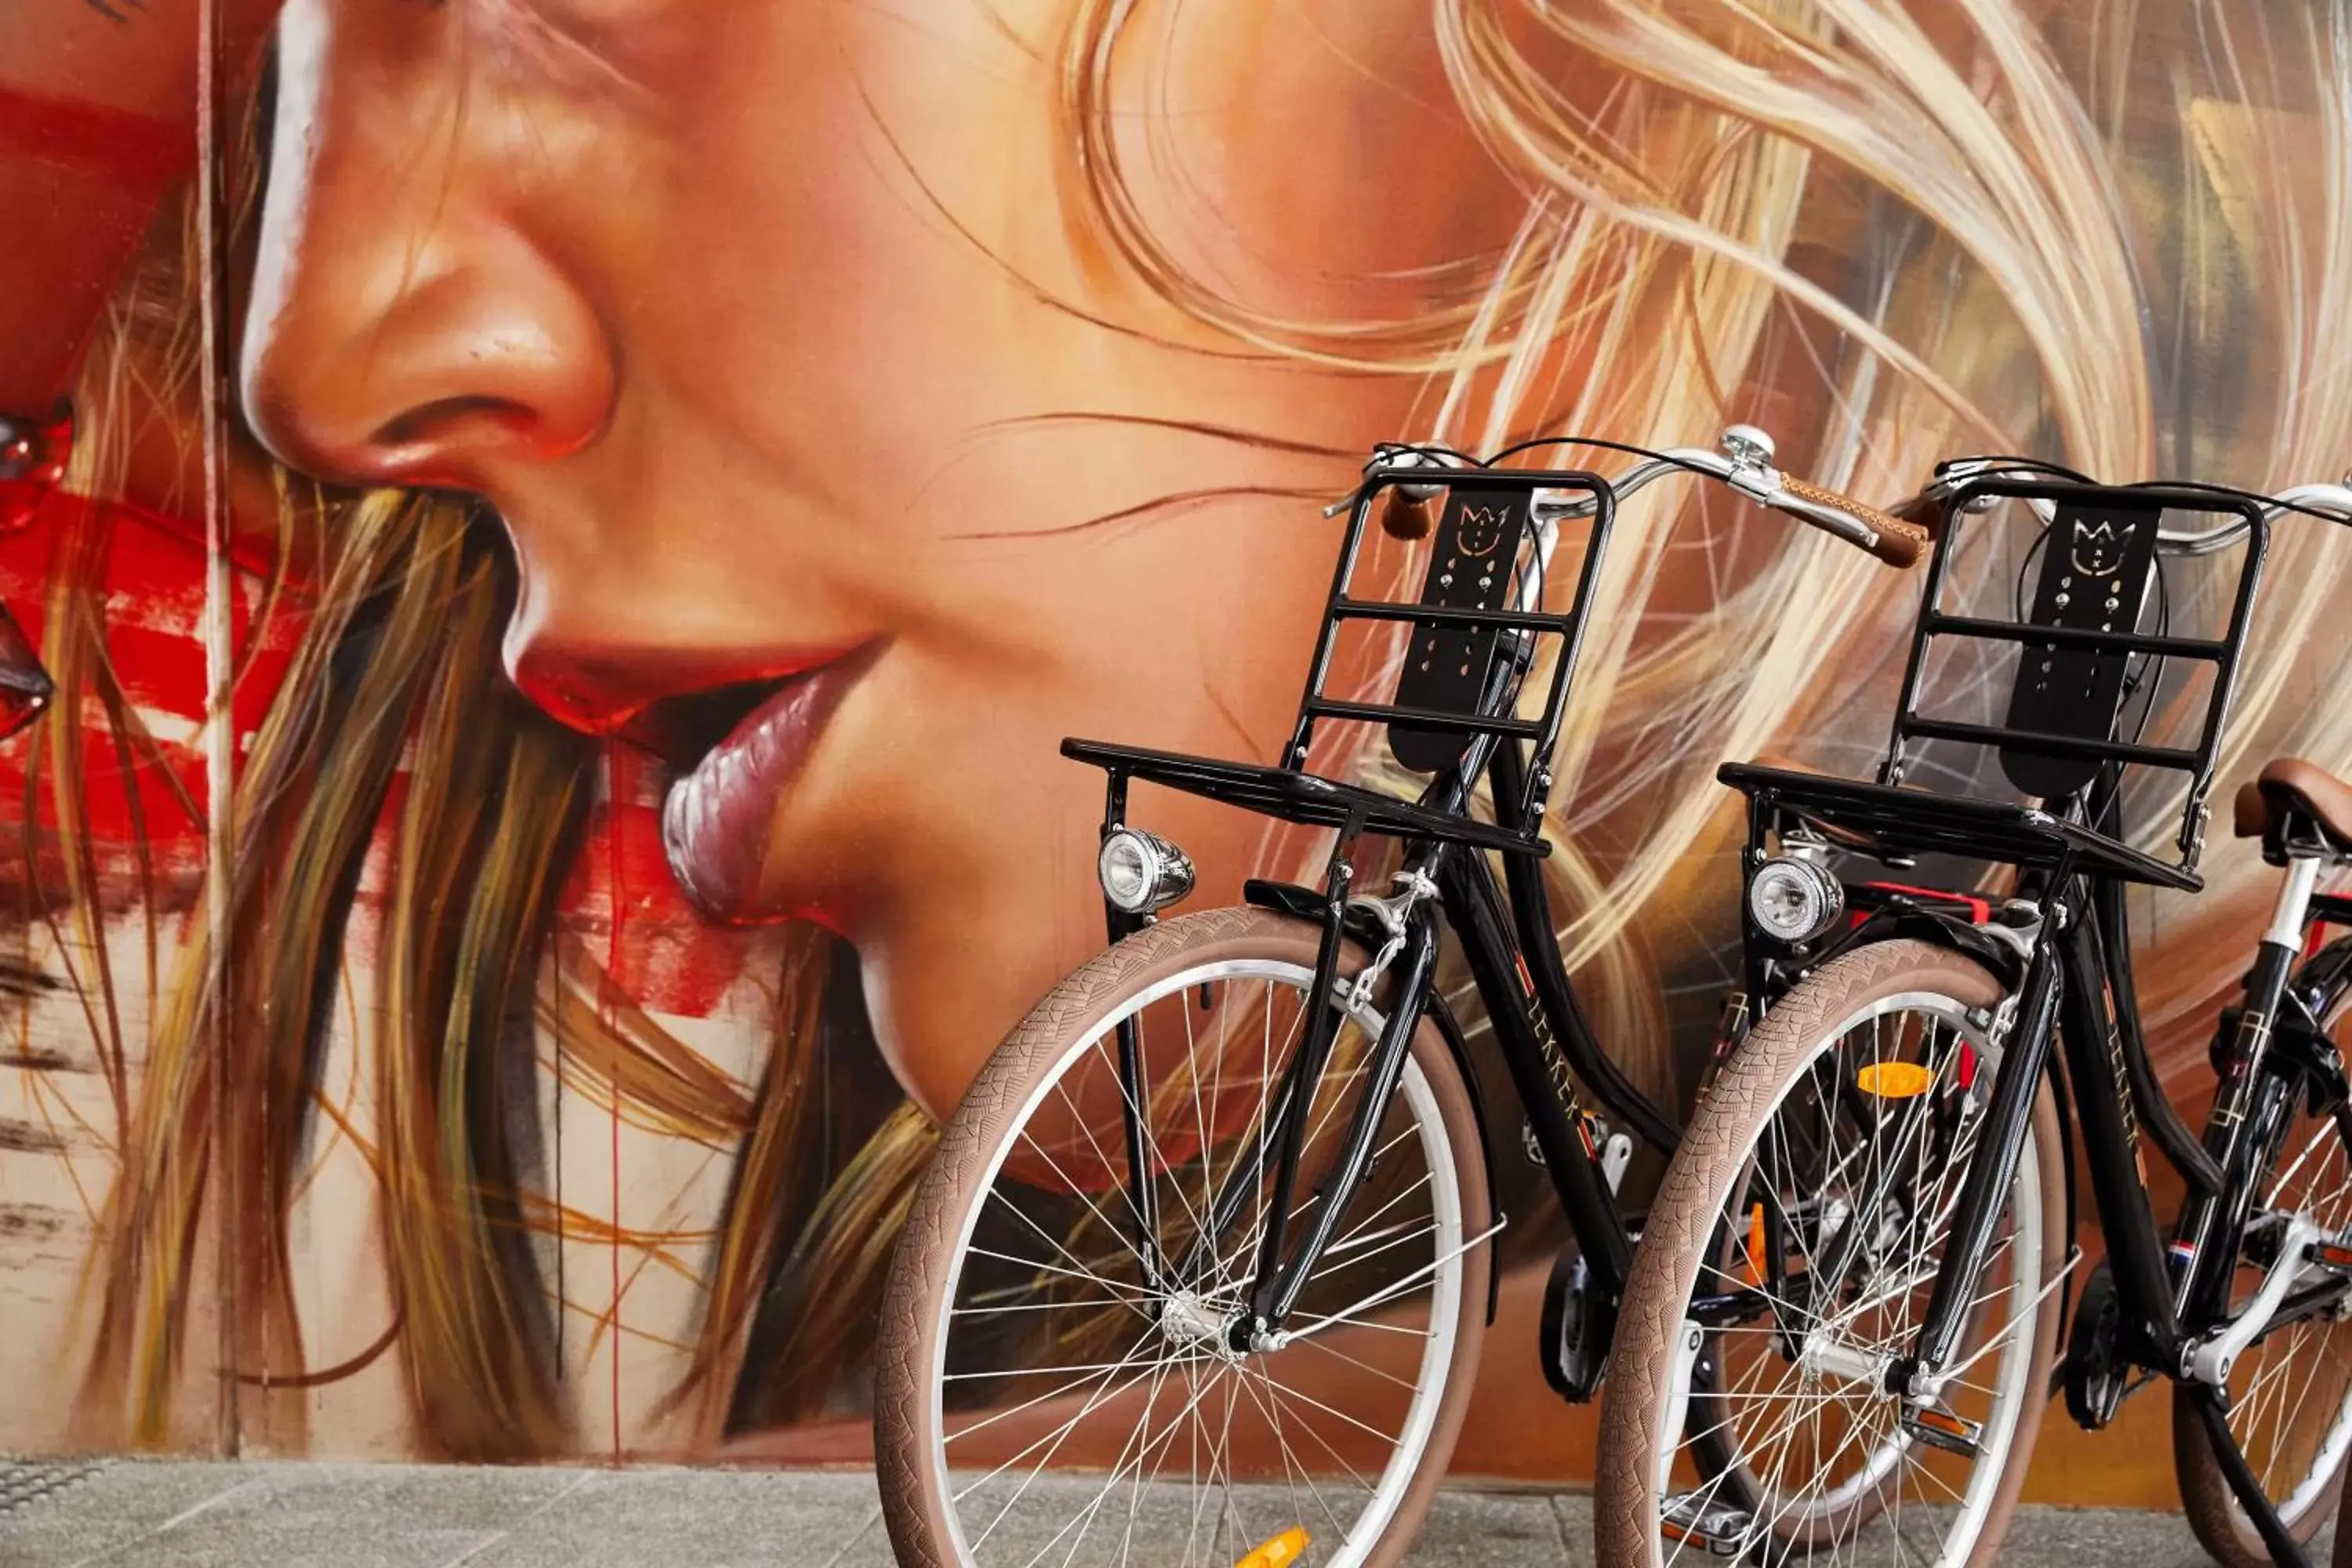 Area and facilities, Biking in Art Series - The Adnate